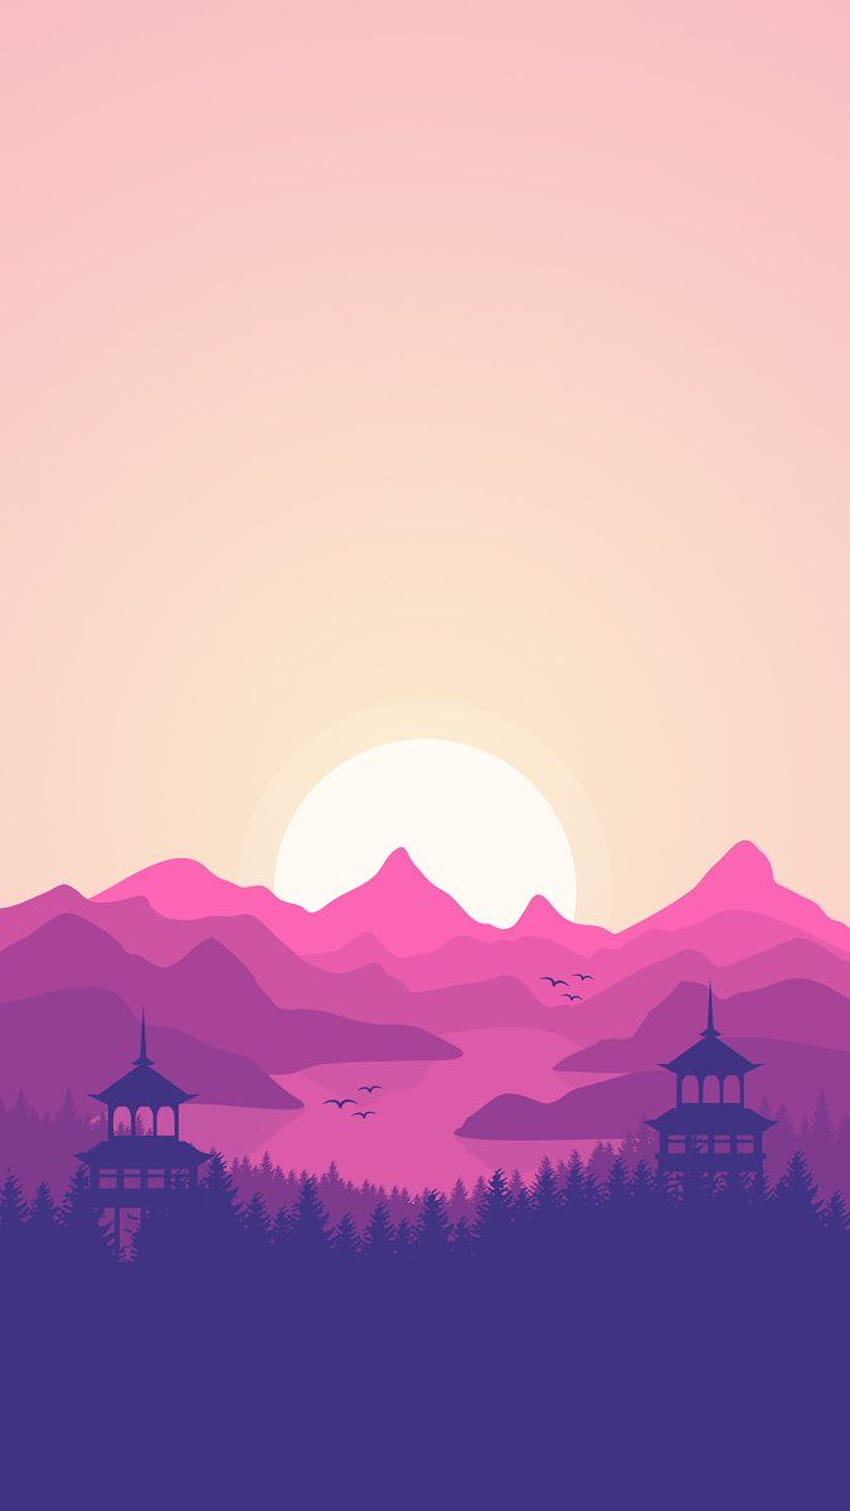 Download these minimalist Android wallpapers